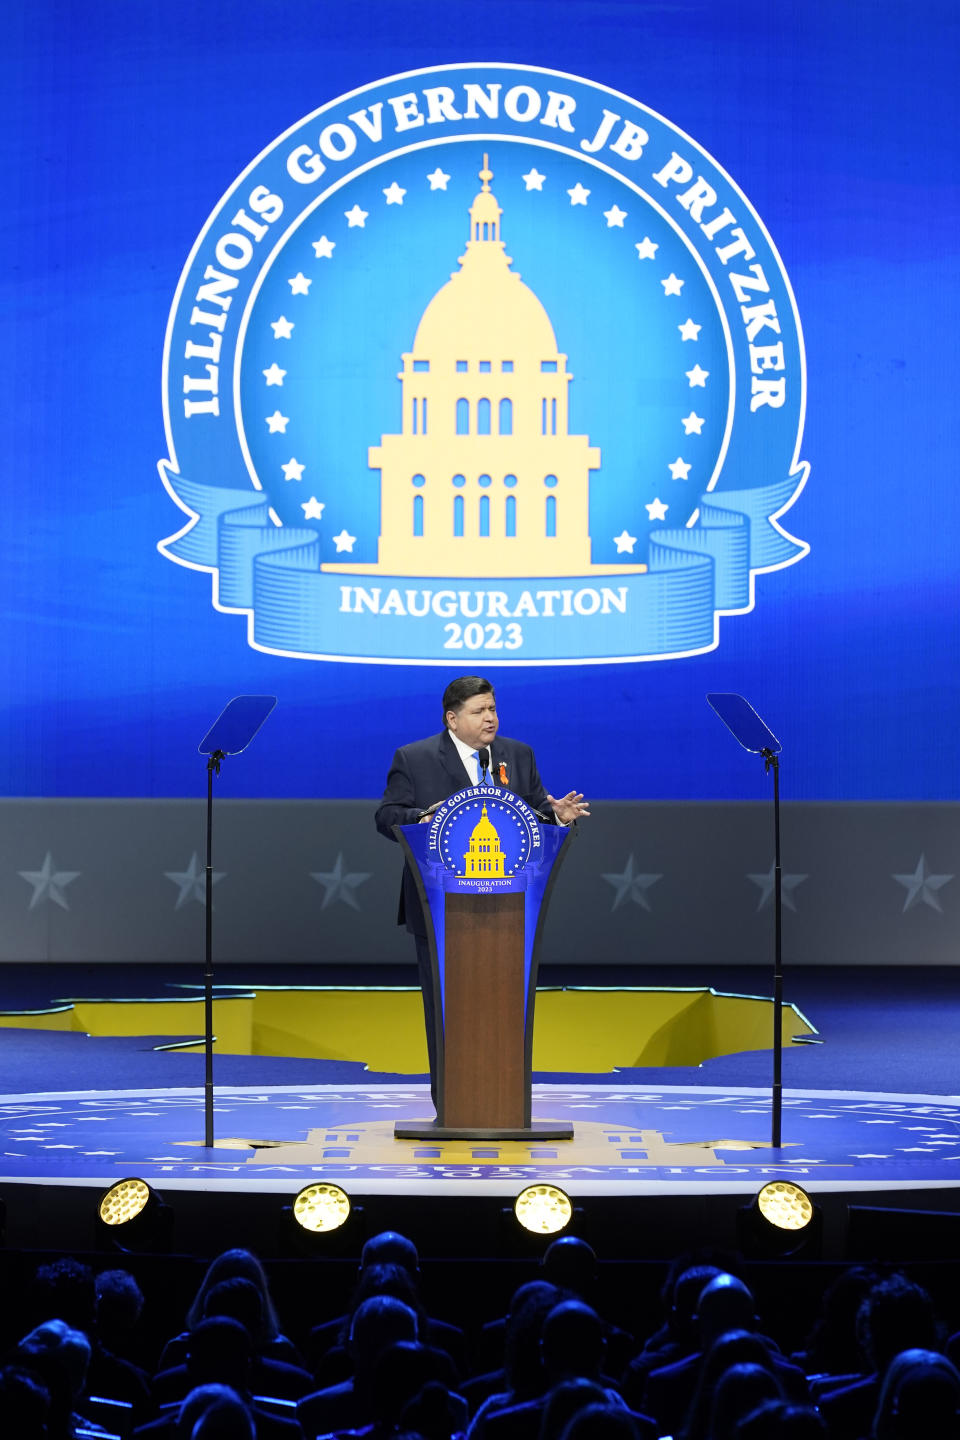 Illinois Gov. J.B. Pritzker delivers his inaugural address during ceremonies Monday, Jan. 9, 2023, in Springfield, Ill. (AP Photo/Charles Rex Arbogast)